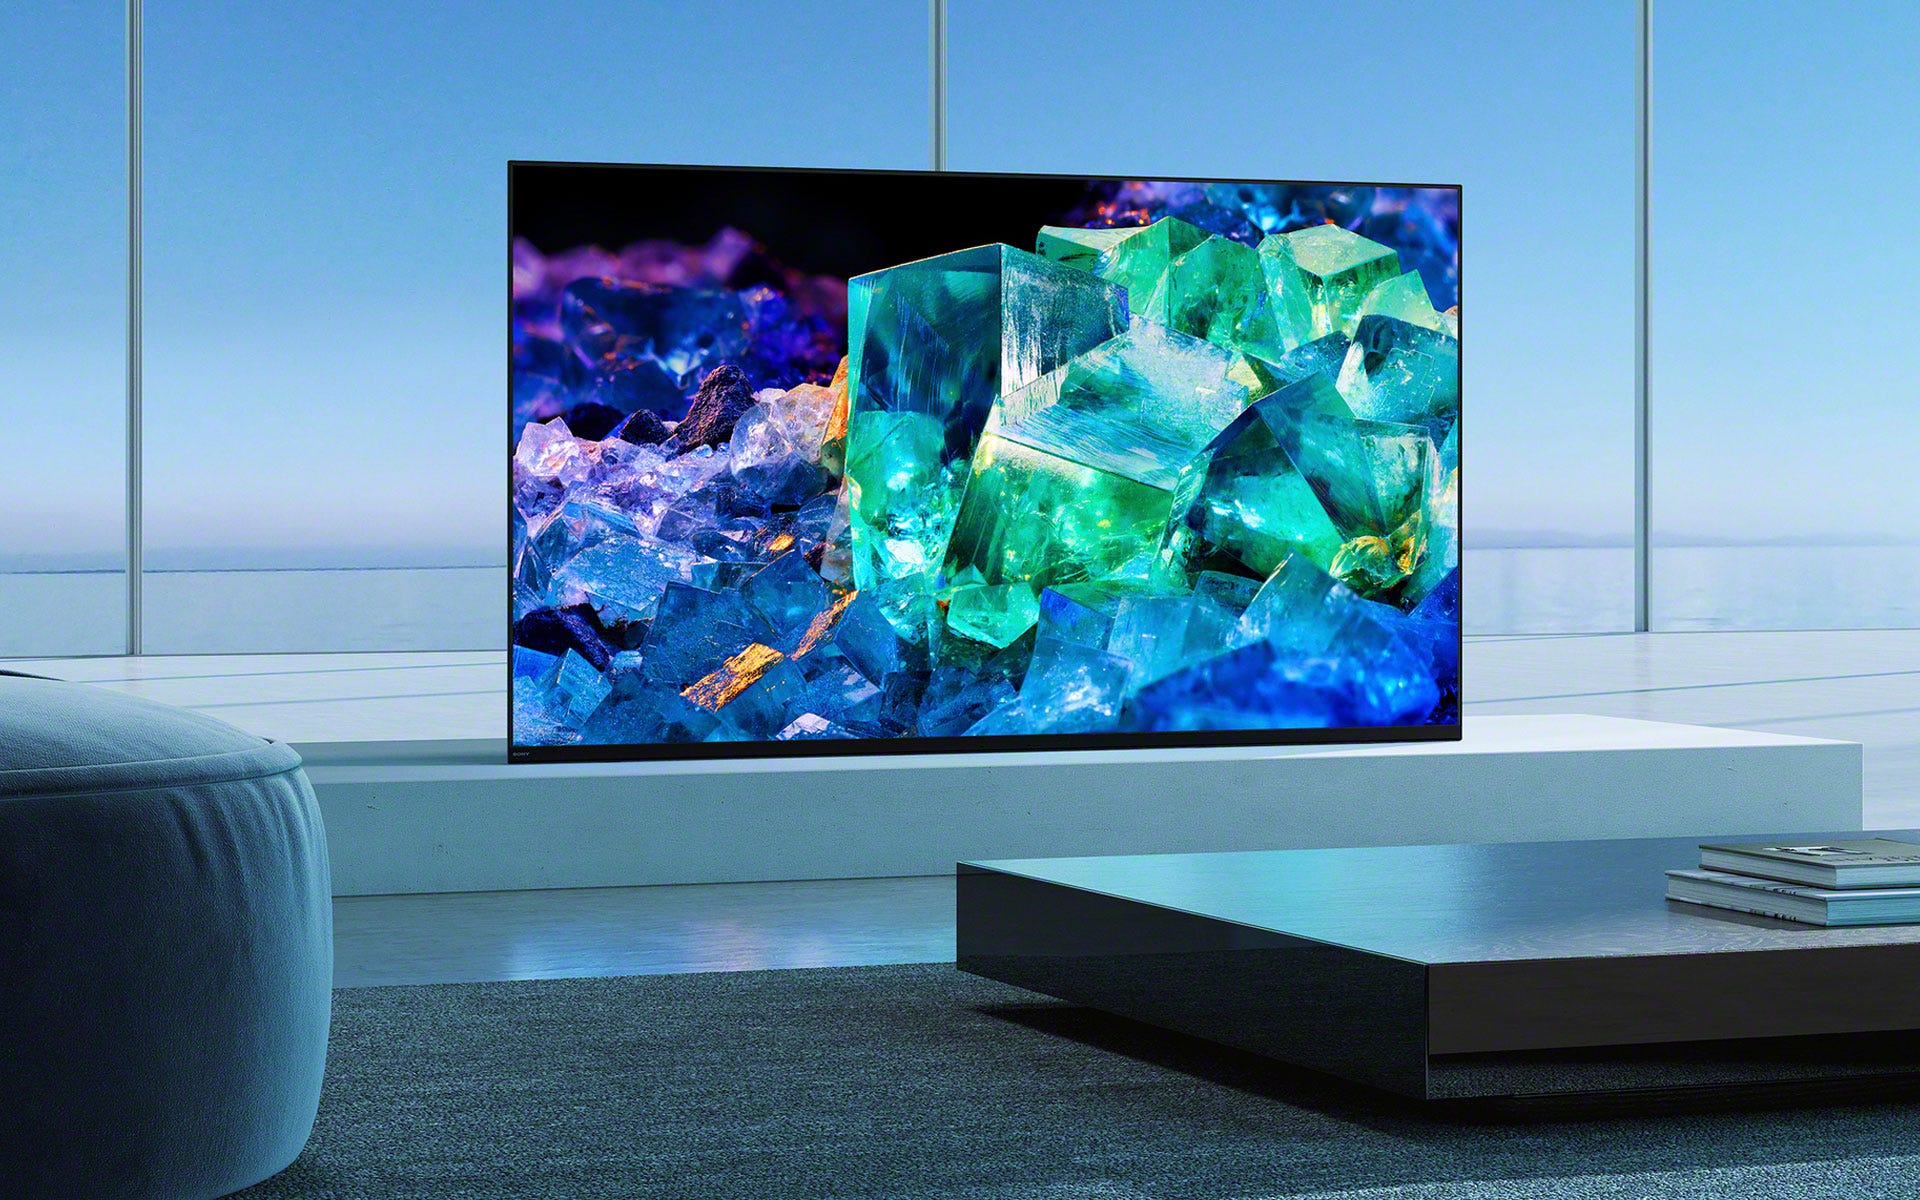 CES 2022 Sony Launches the World’s First QDOLED TVs